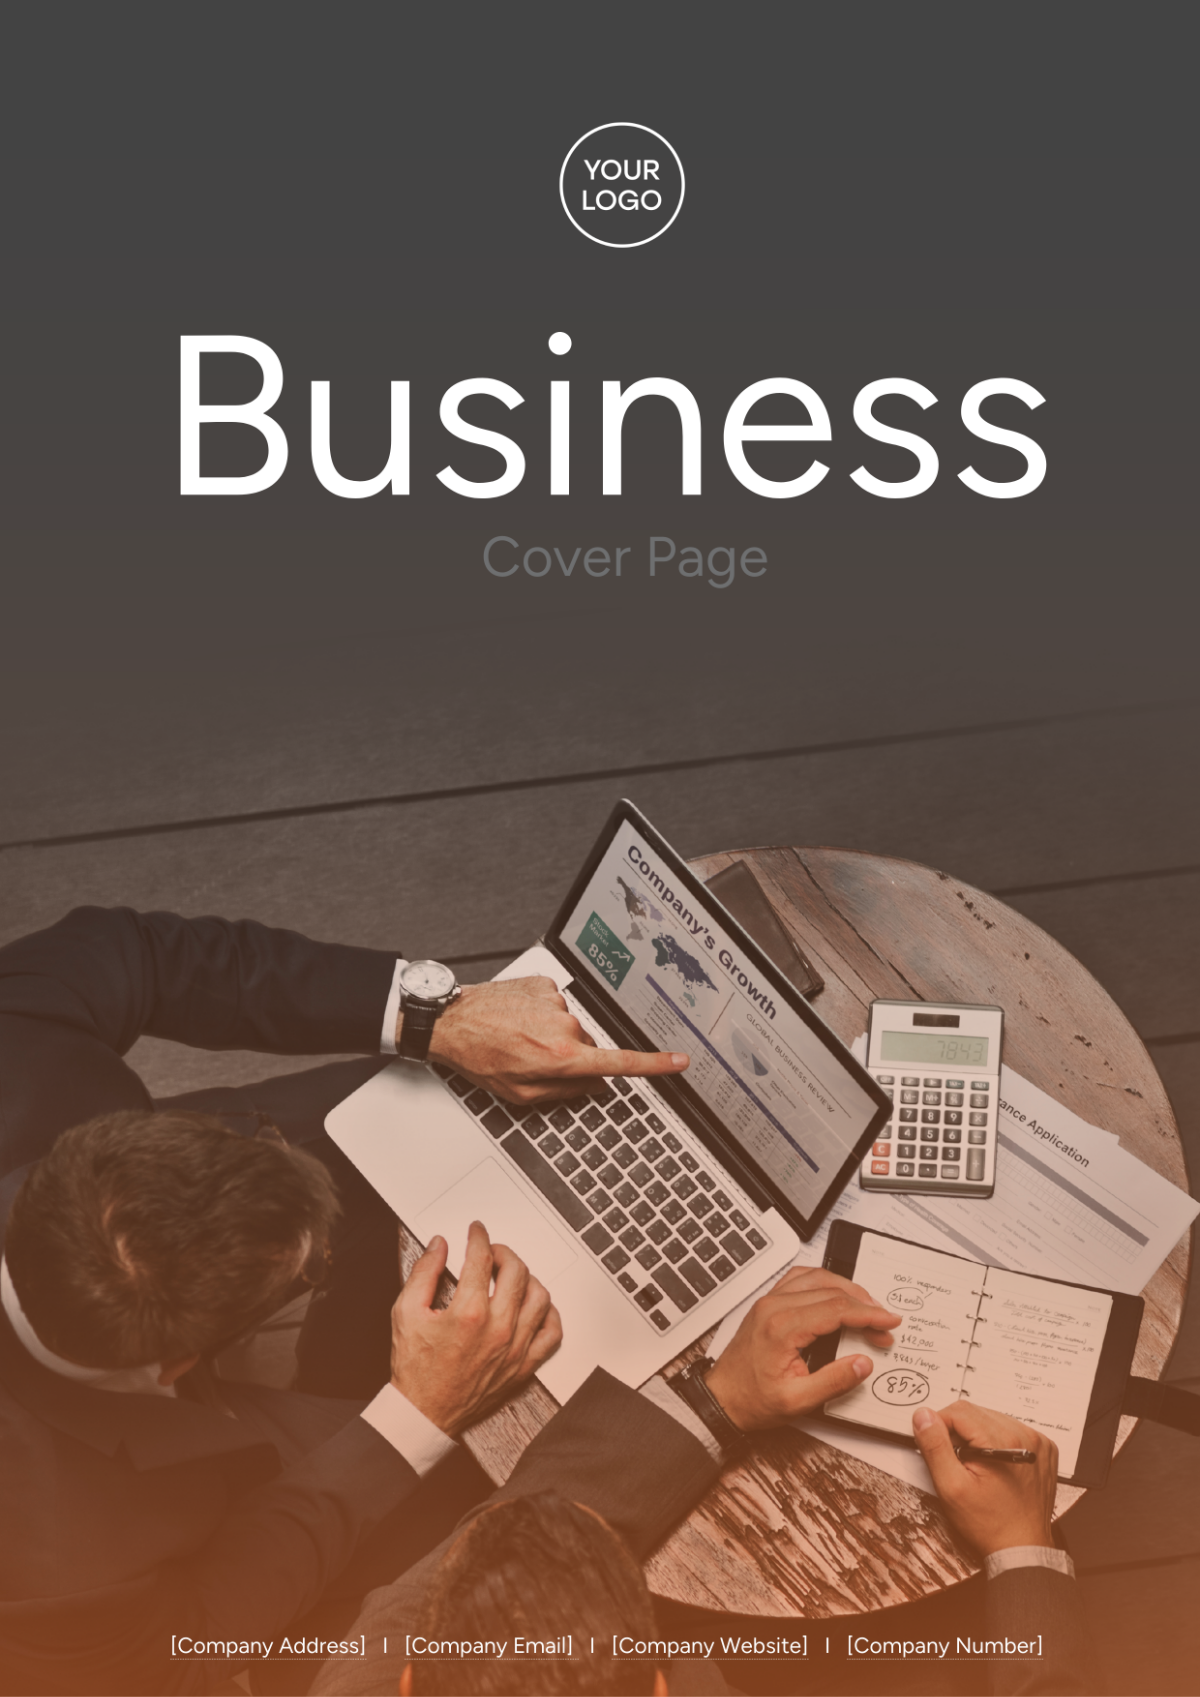 Business Cover Page Image Template